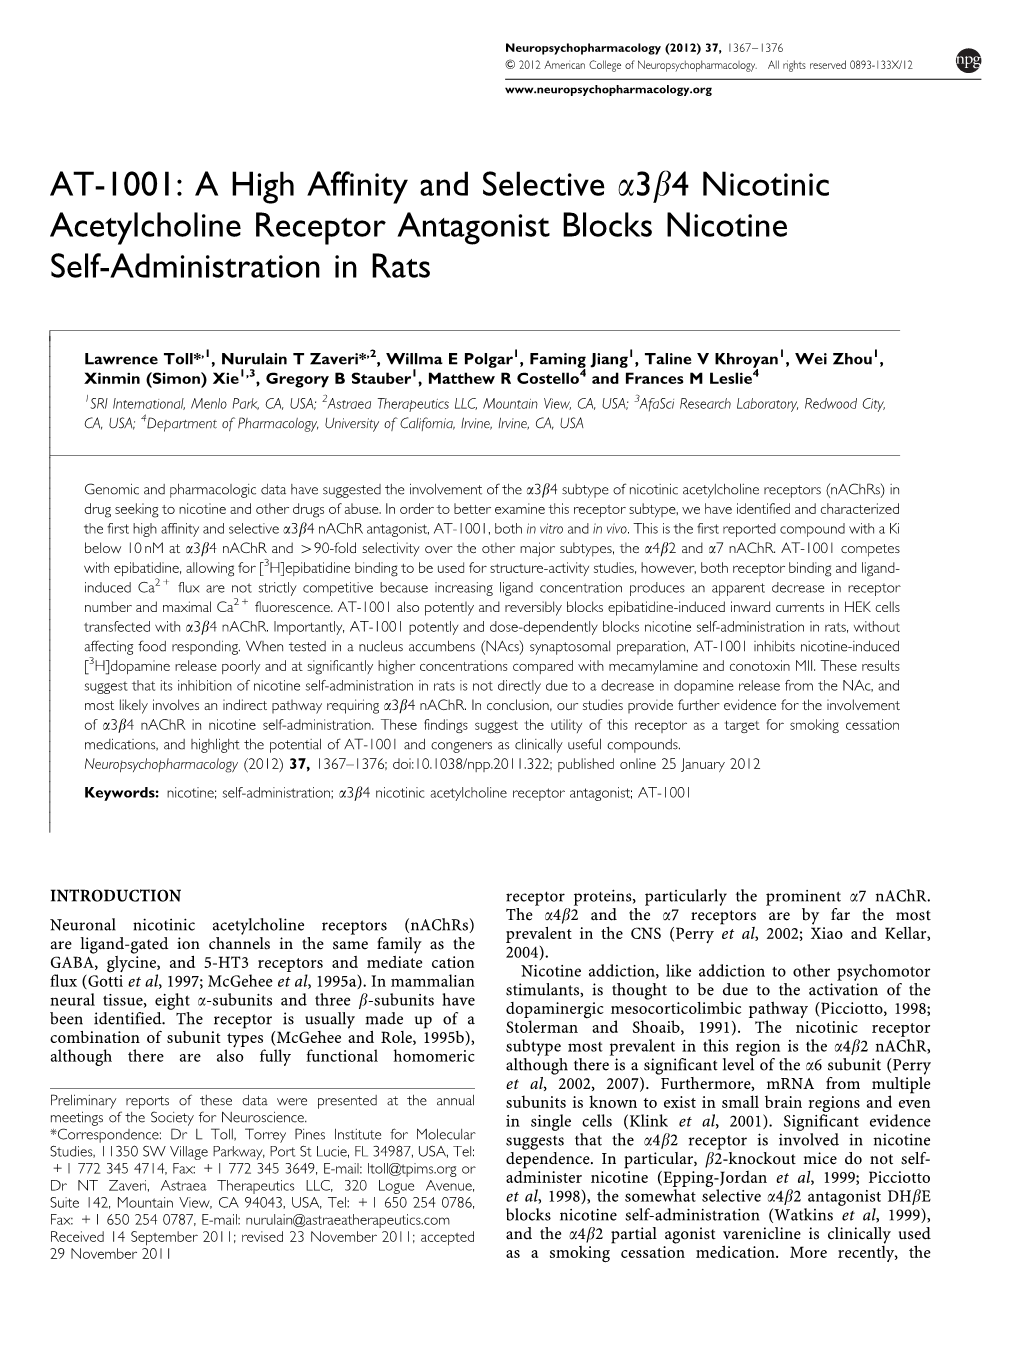 4 Nicotinic Acetylcholine Receptor Antagonist Blocks Nicotine Self-Administration in Rats